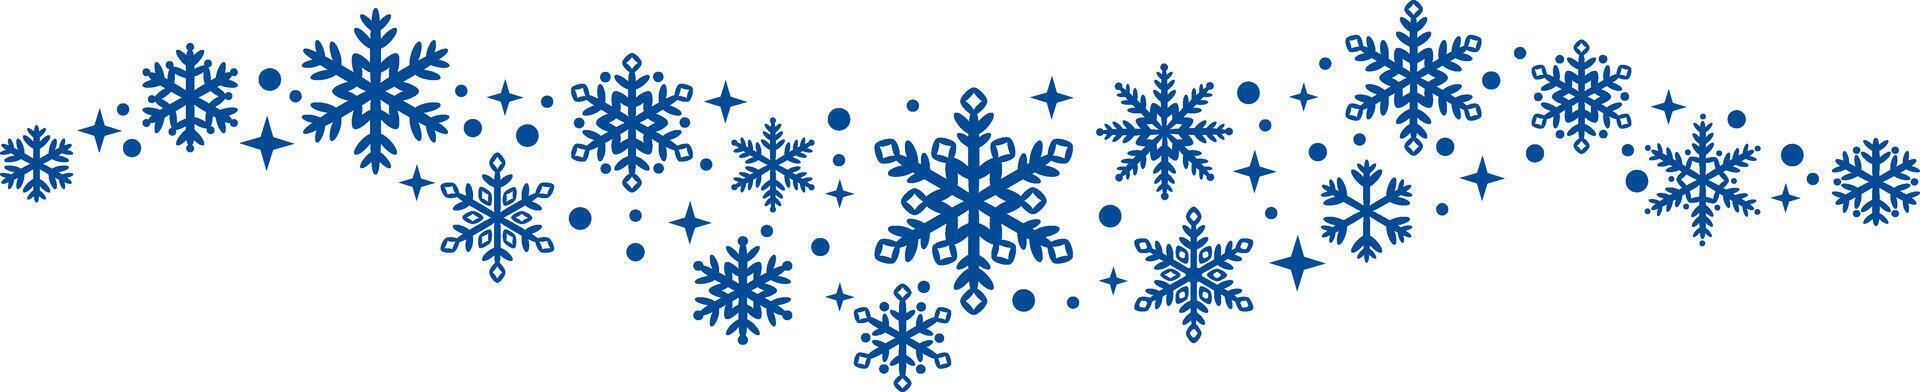 Blue snowflake vector wave, elegant clip art illustration for winter holiday, hand drawn isolated decorative element